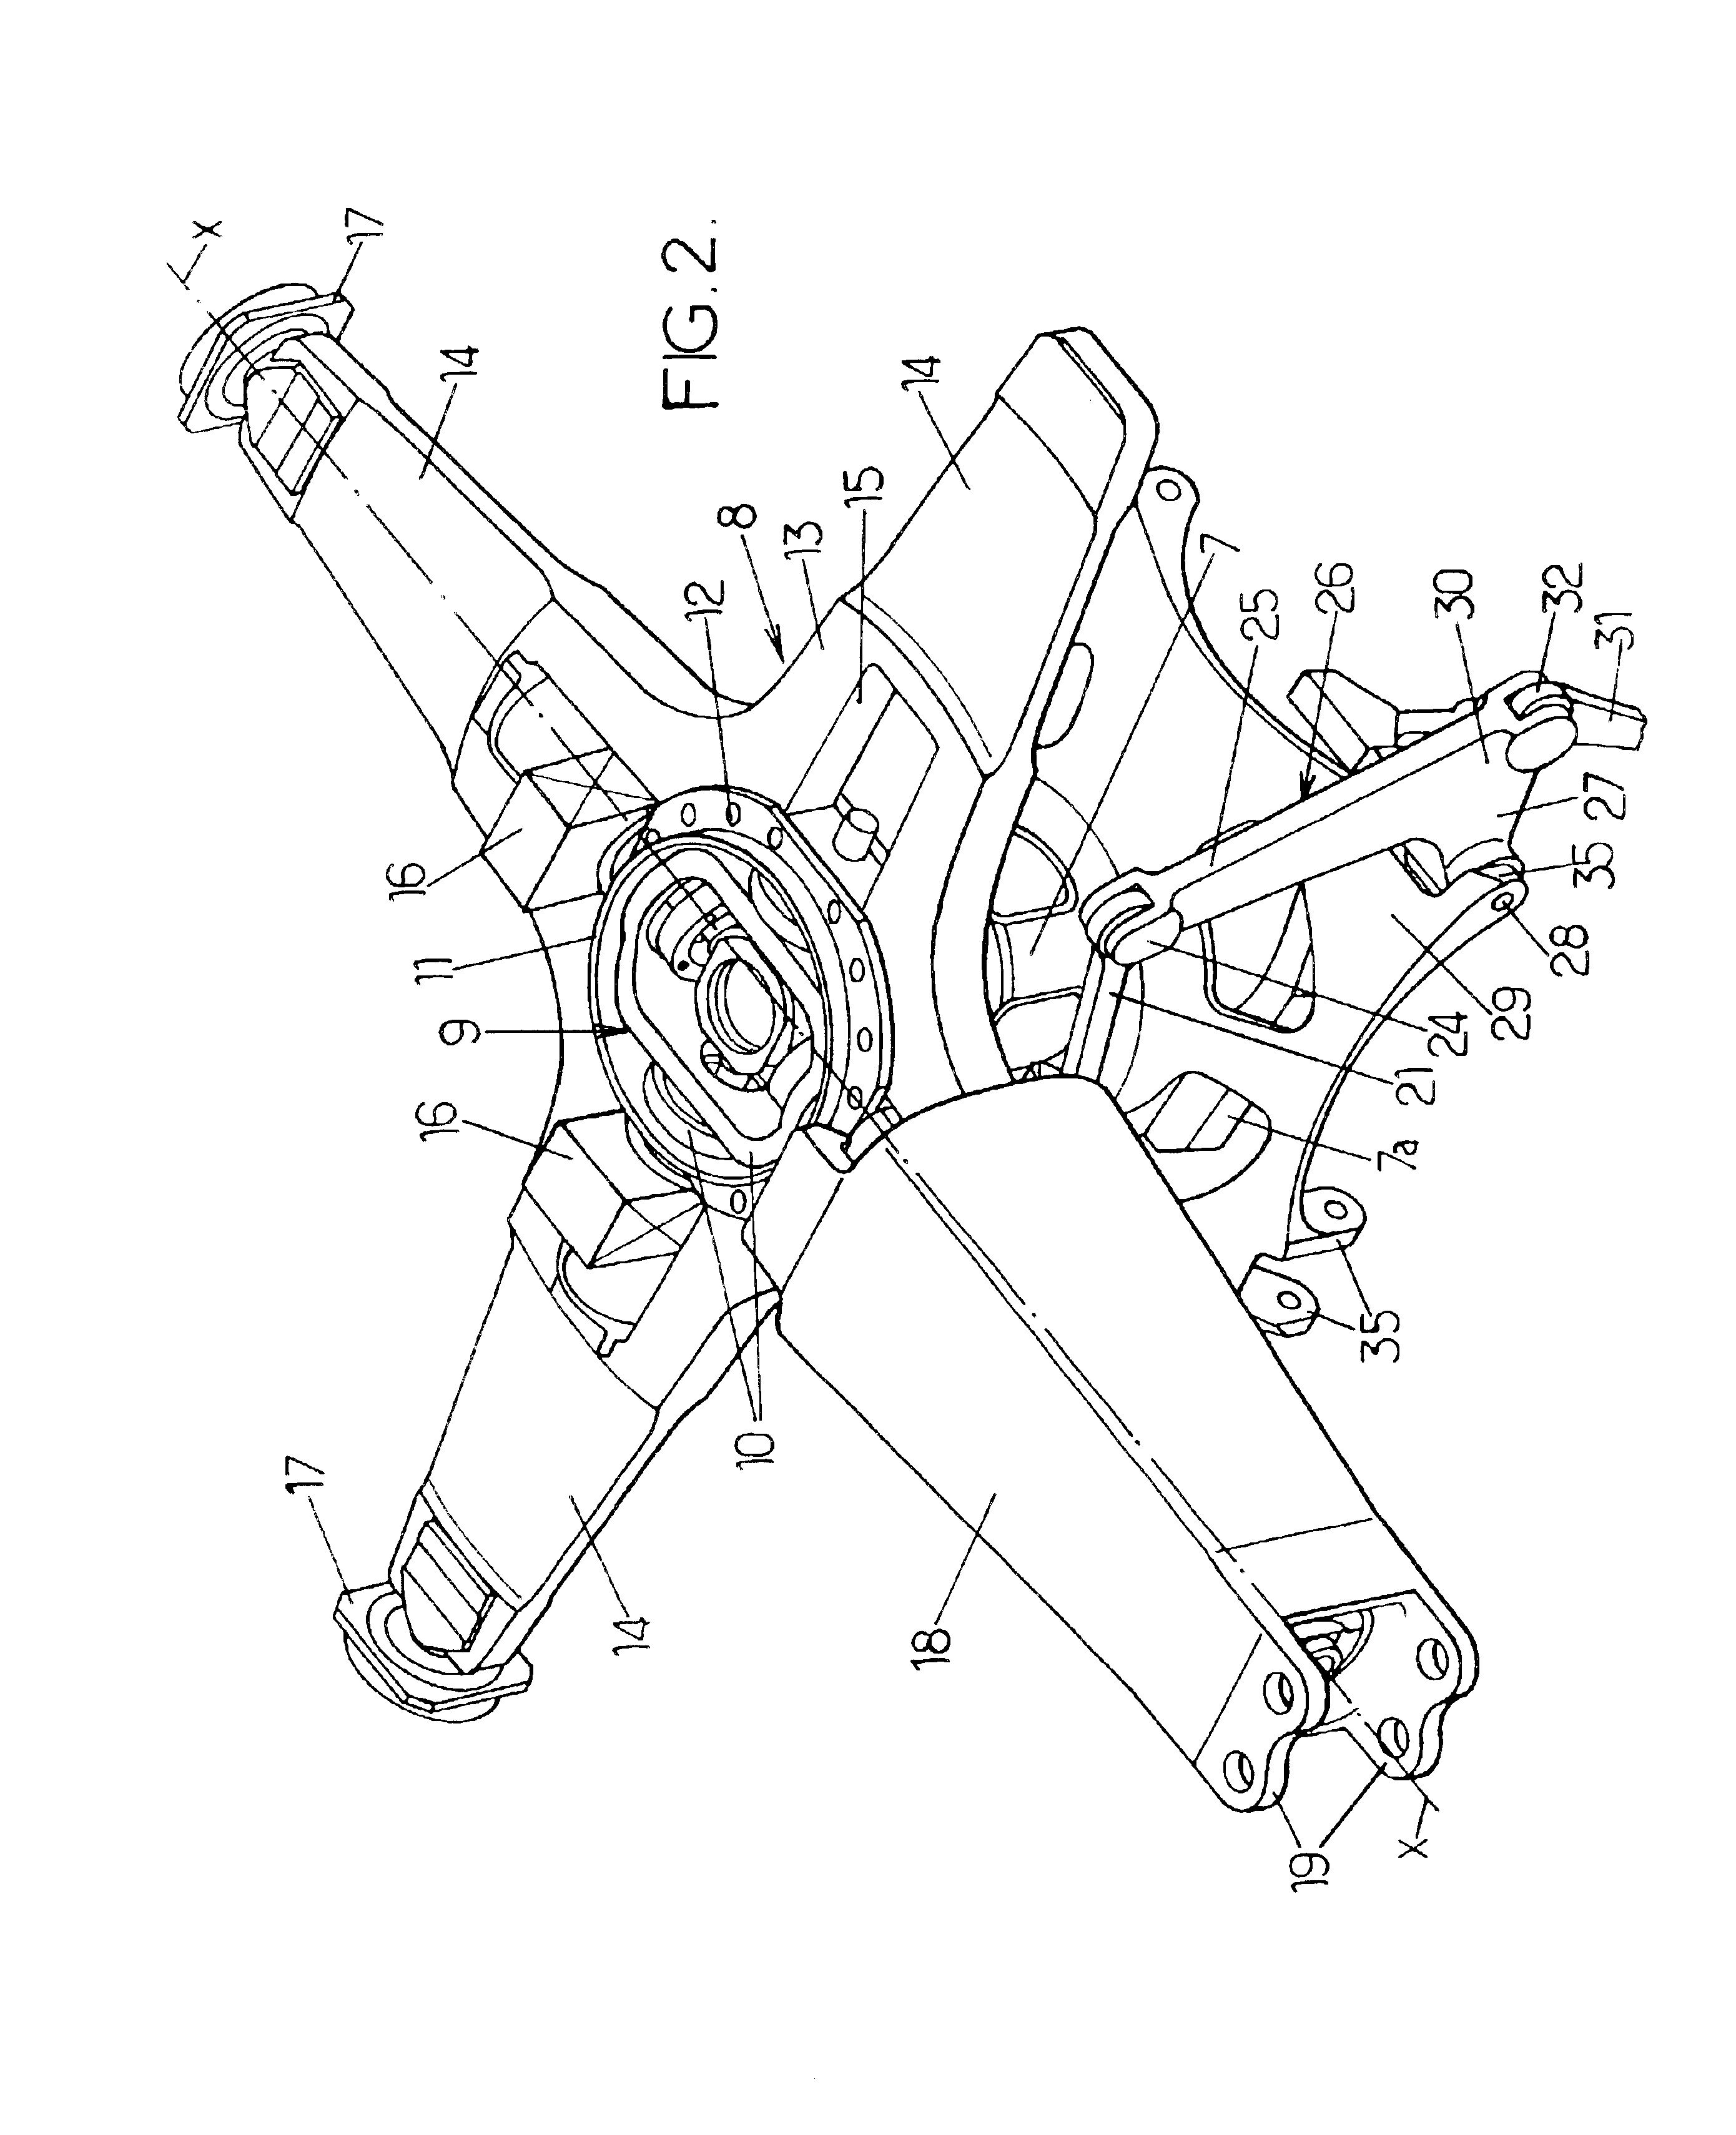 Device for controlling the pitch of the blades of a convertible aircraft rotor